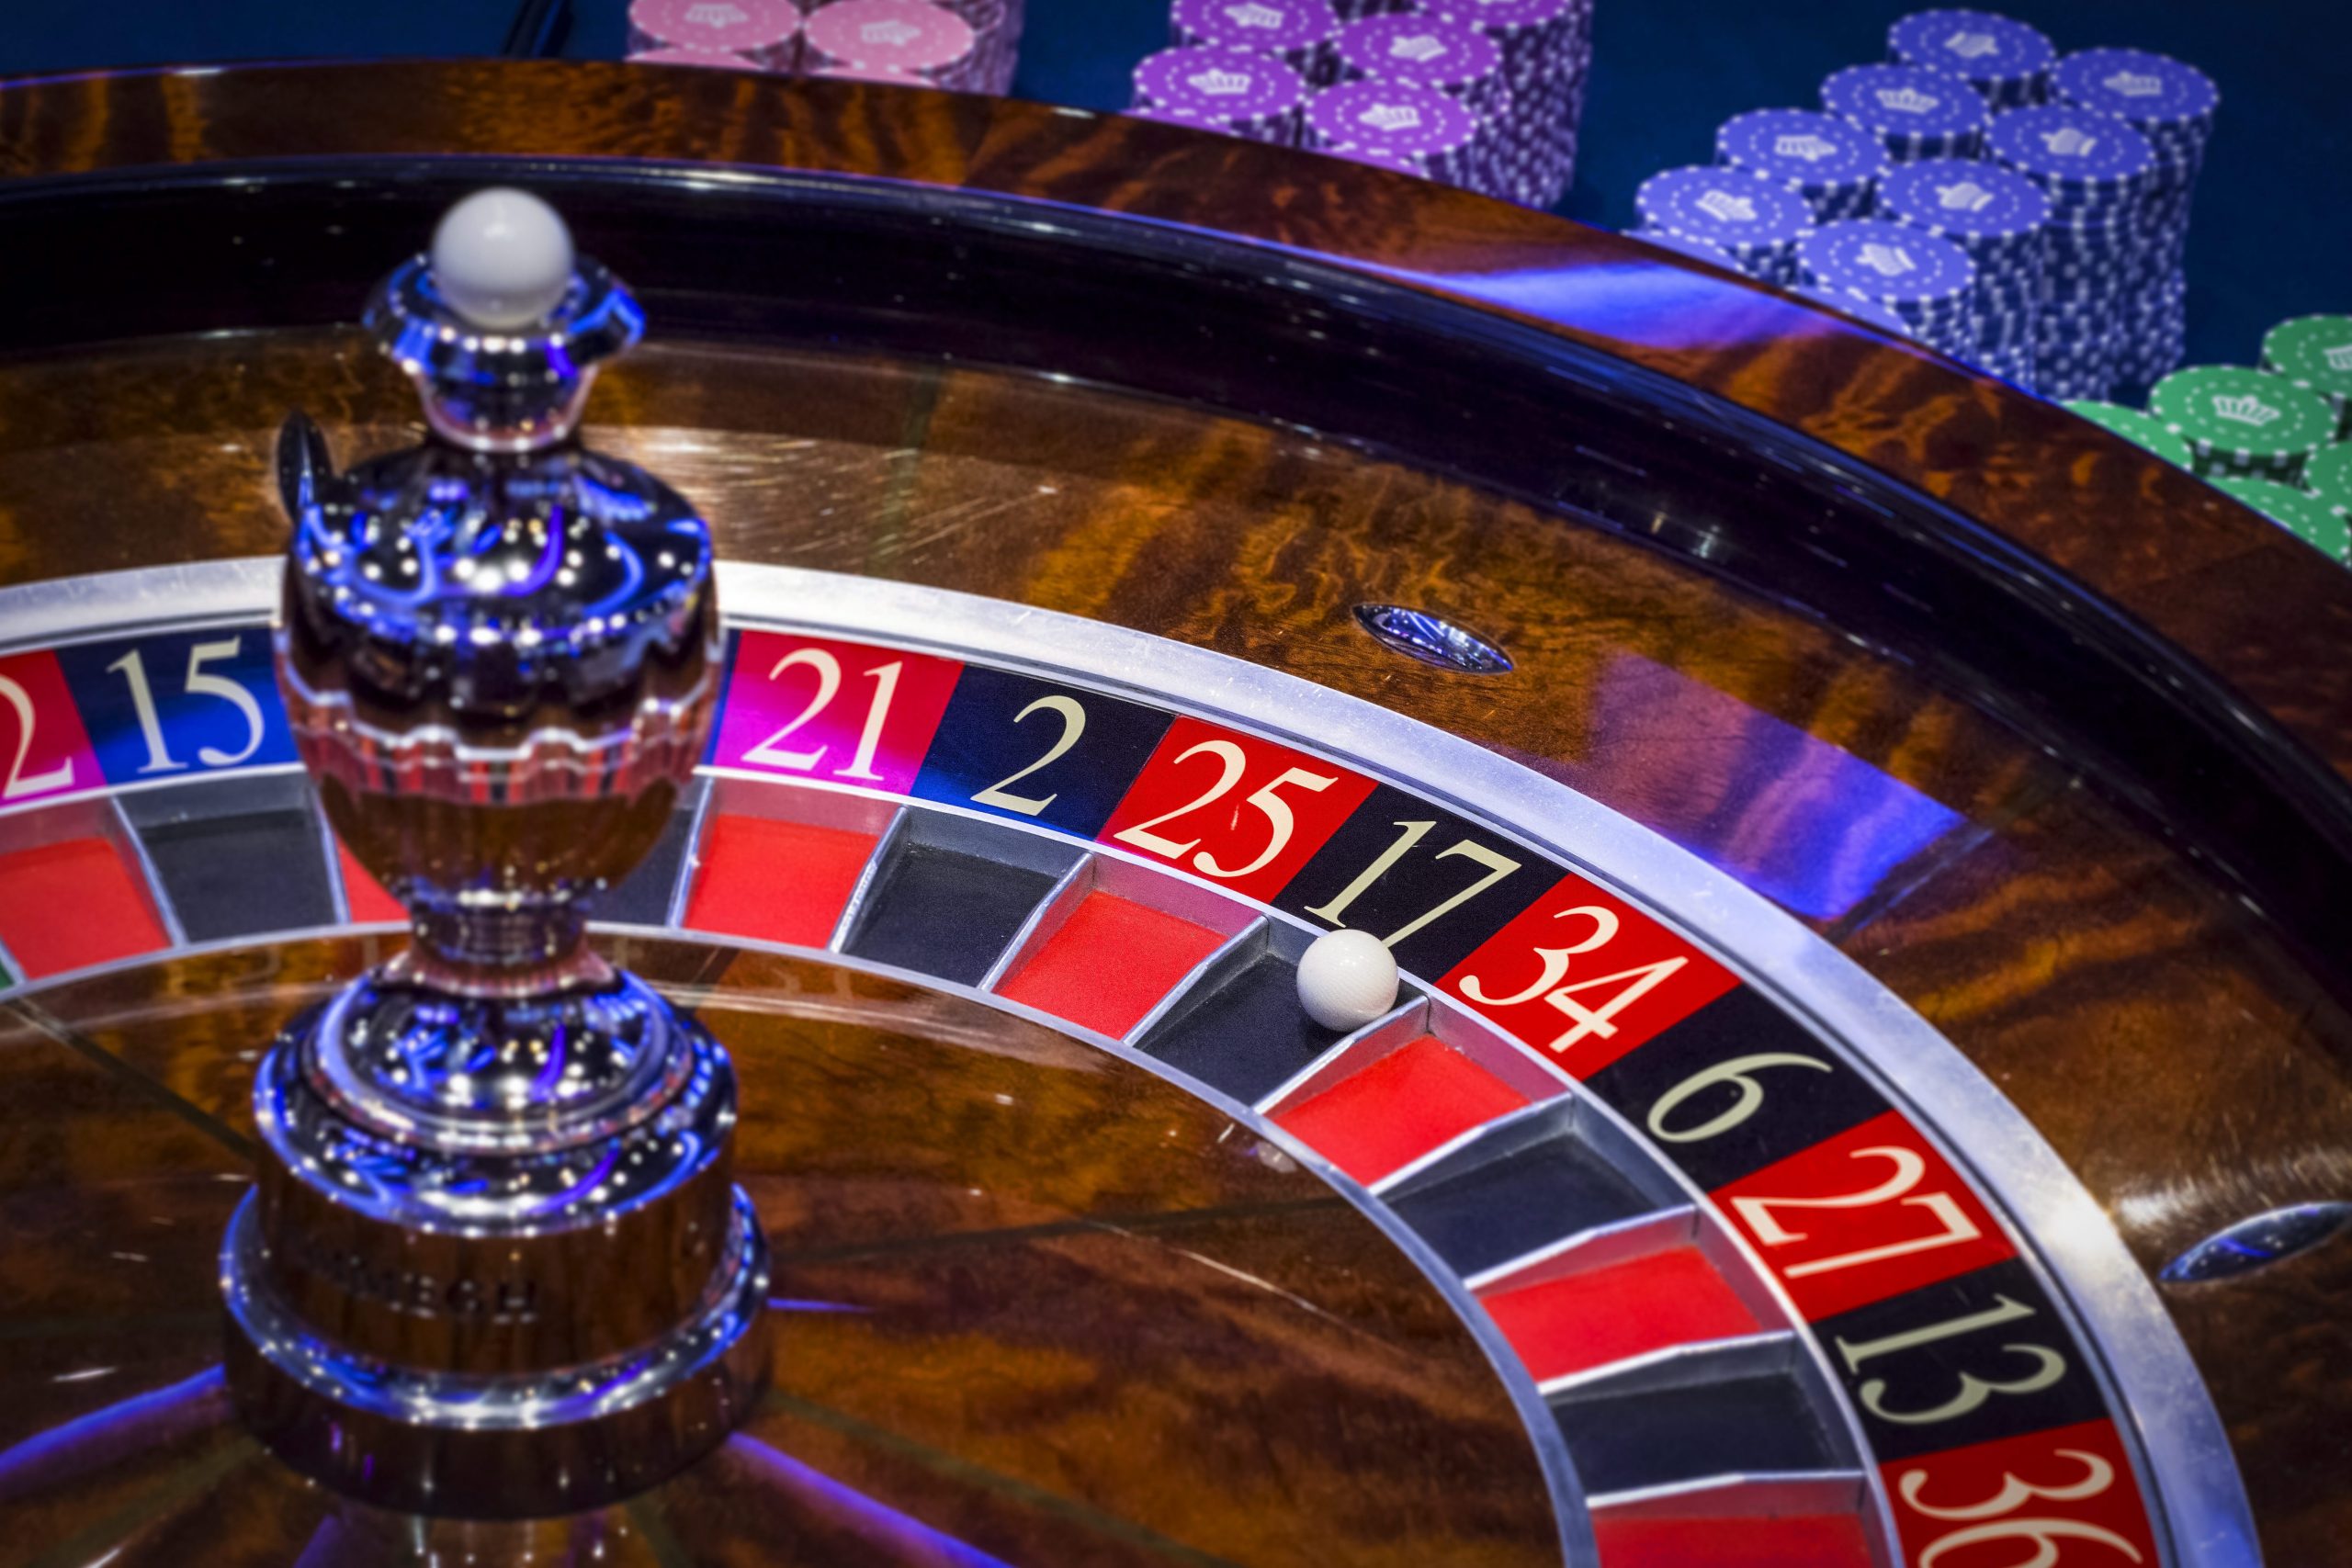 Casinos Finally Included in Upcoming Restrictions